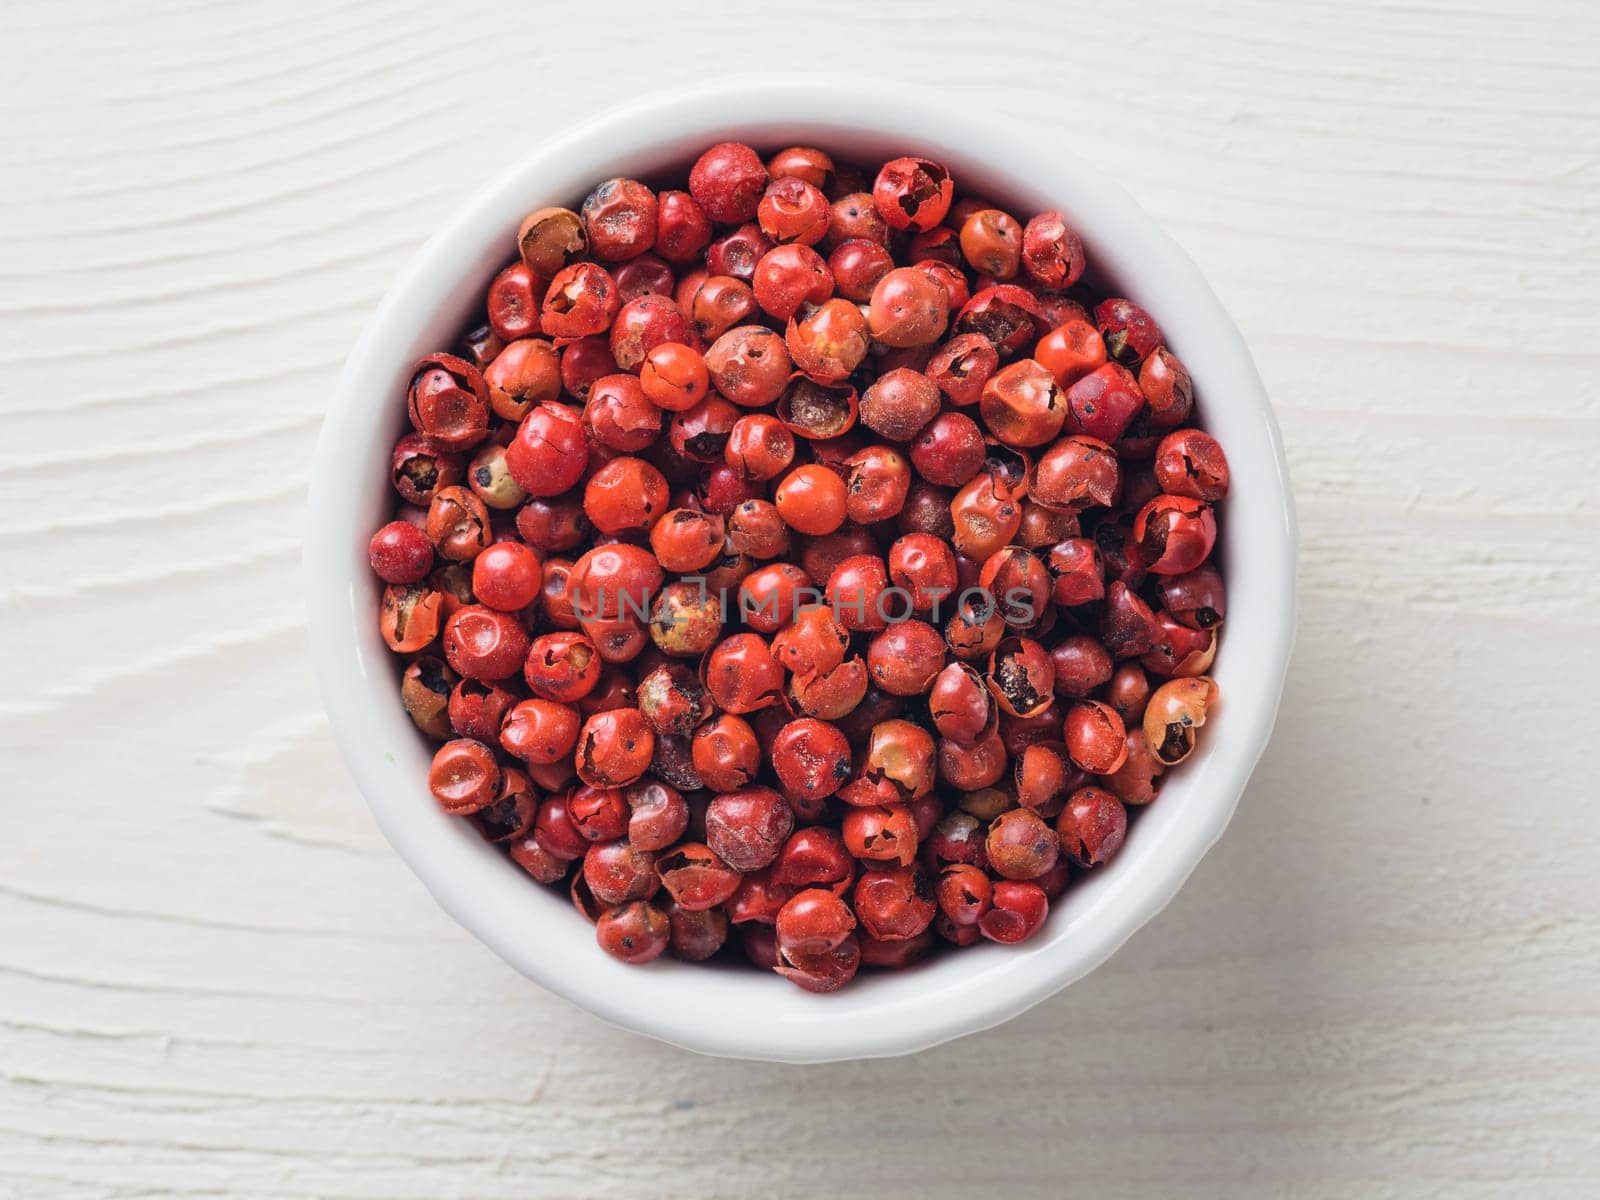 Pile with dried pink pepper berries on white wooden table. Close up view of pink peppercorn. Top view or flat-lay.